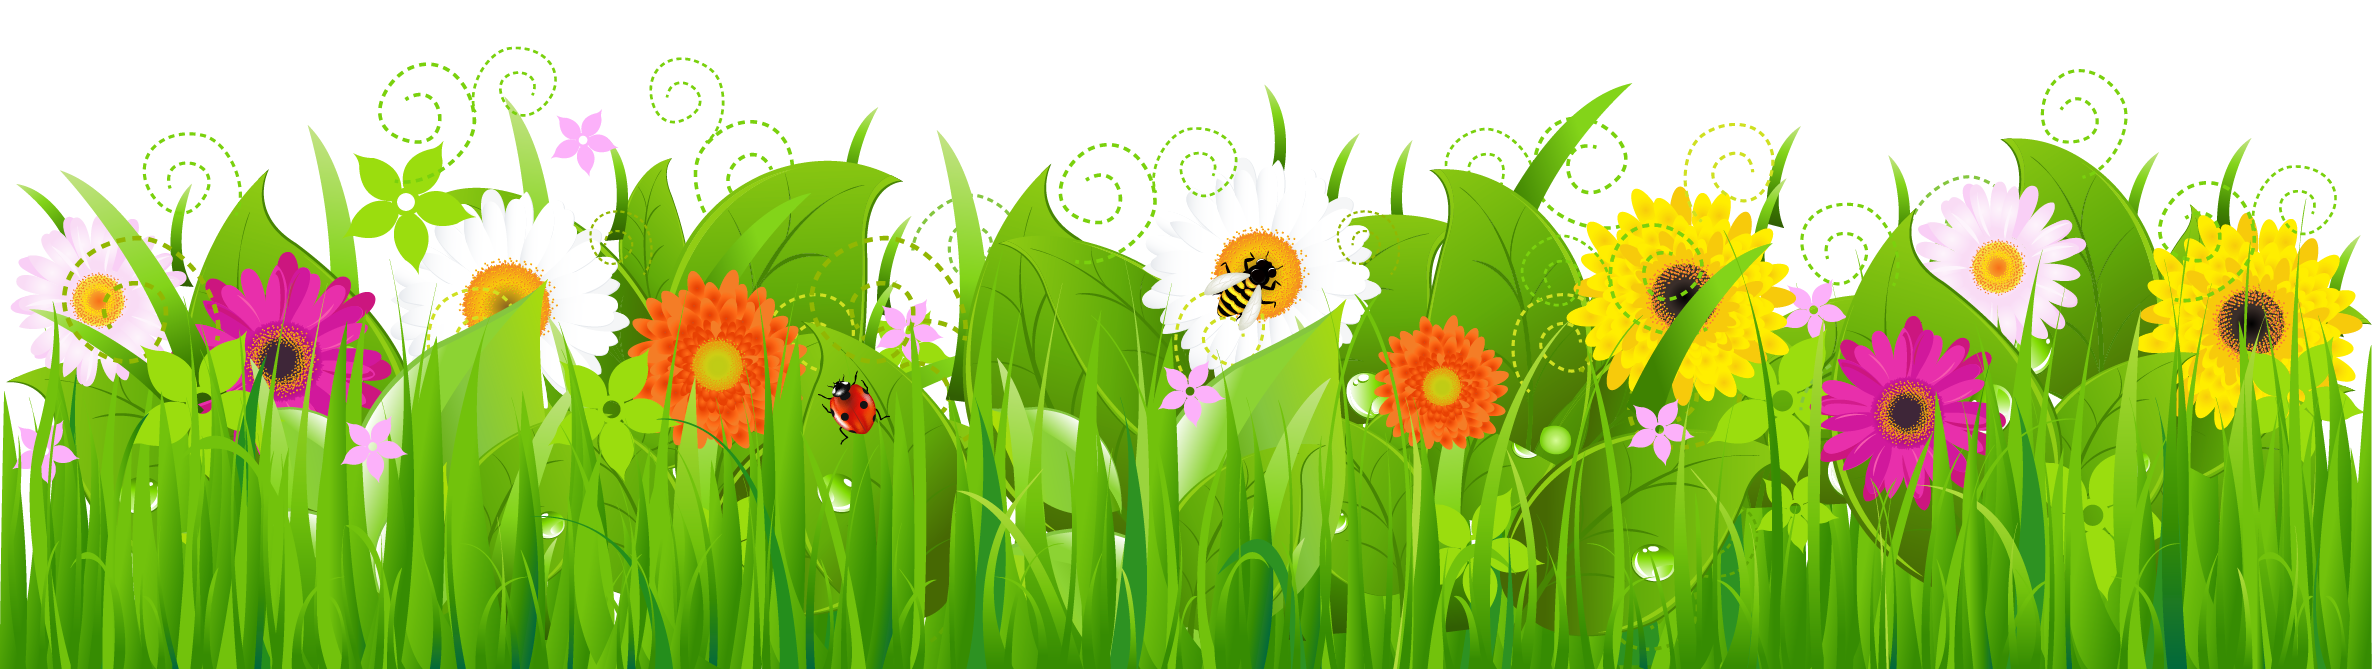 Free Flowers Cliparts, Download Free Clip Art, Free Clip Art.